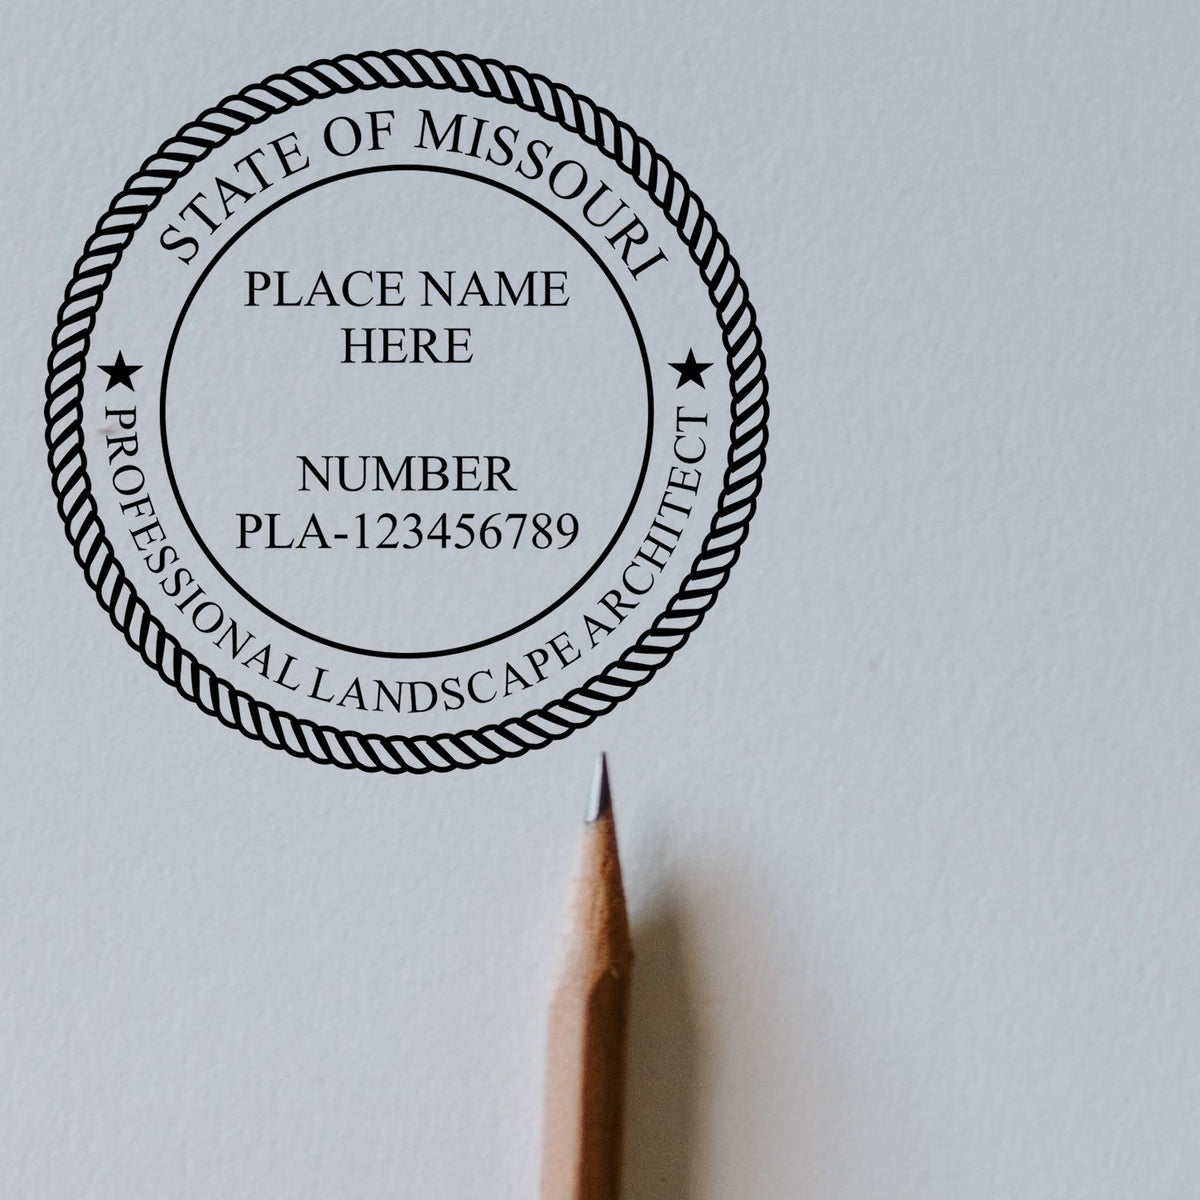 Slim Pre-Inked Missouri Landscape Architect Seal Stamp in use photo showing a stamped imprint of the Slim Pre-Inked Missouri Landscape Architect Seal Stamp